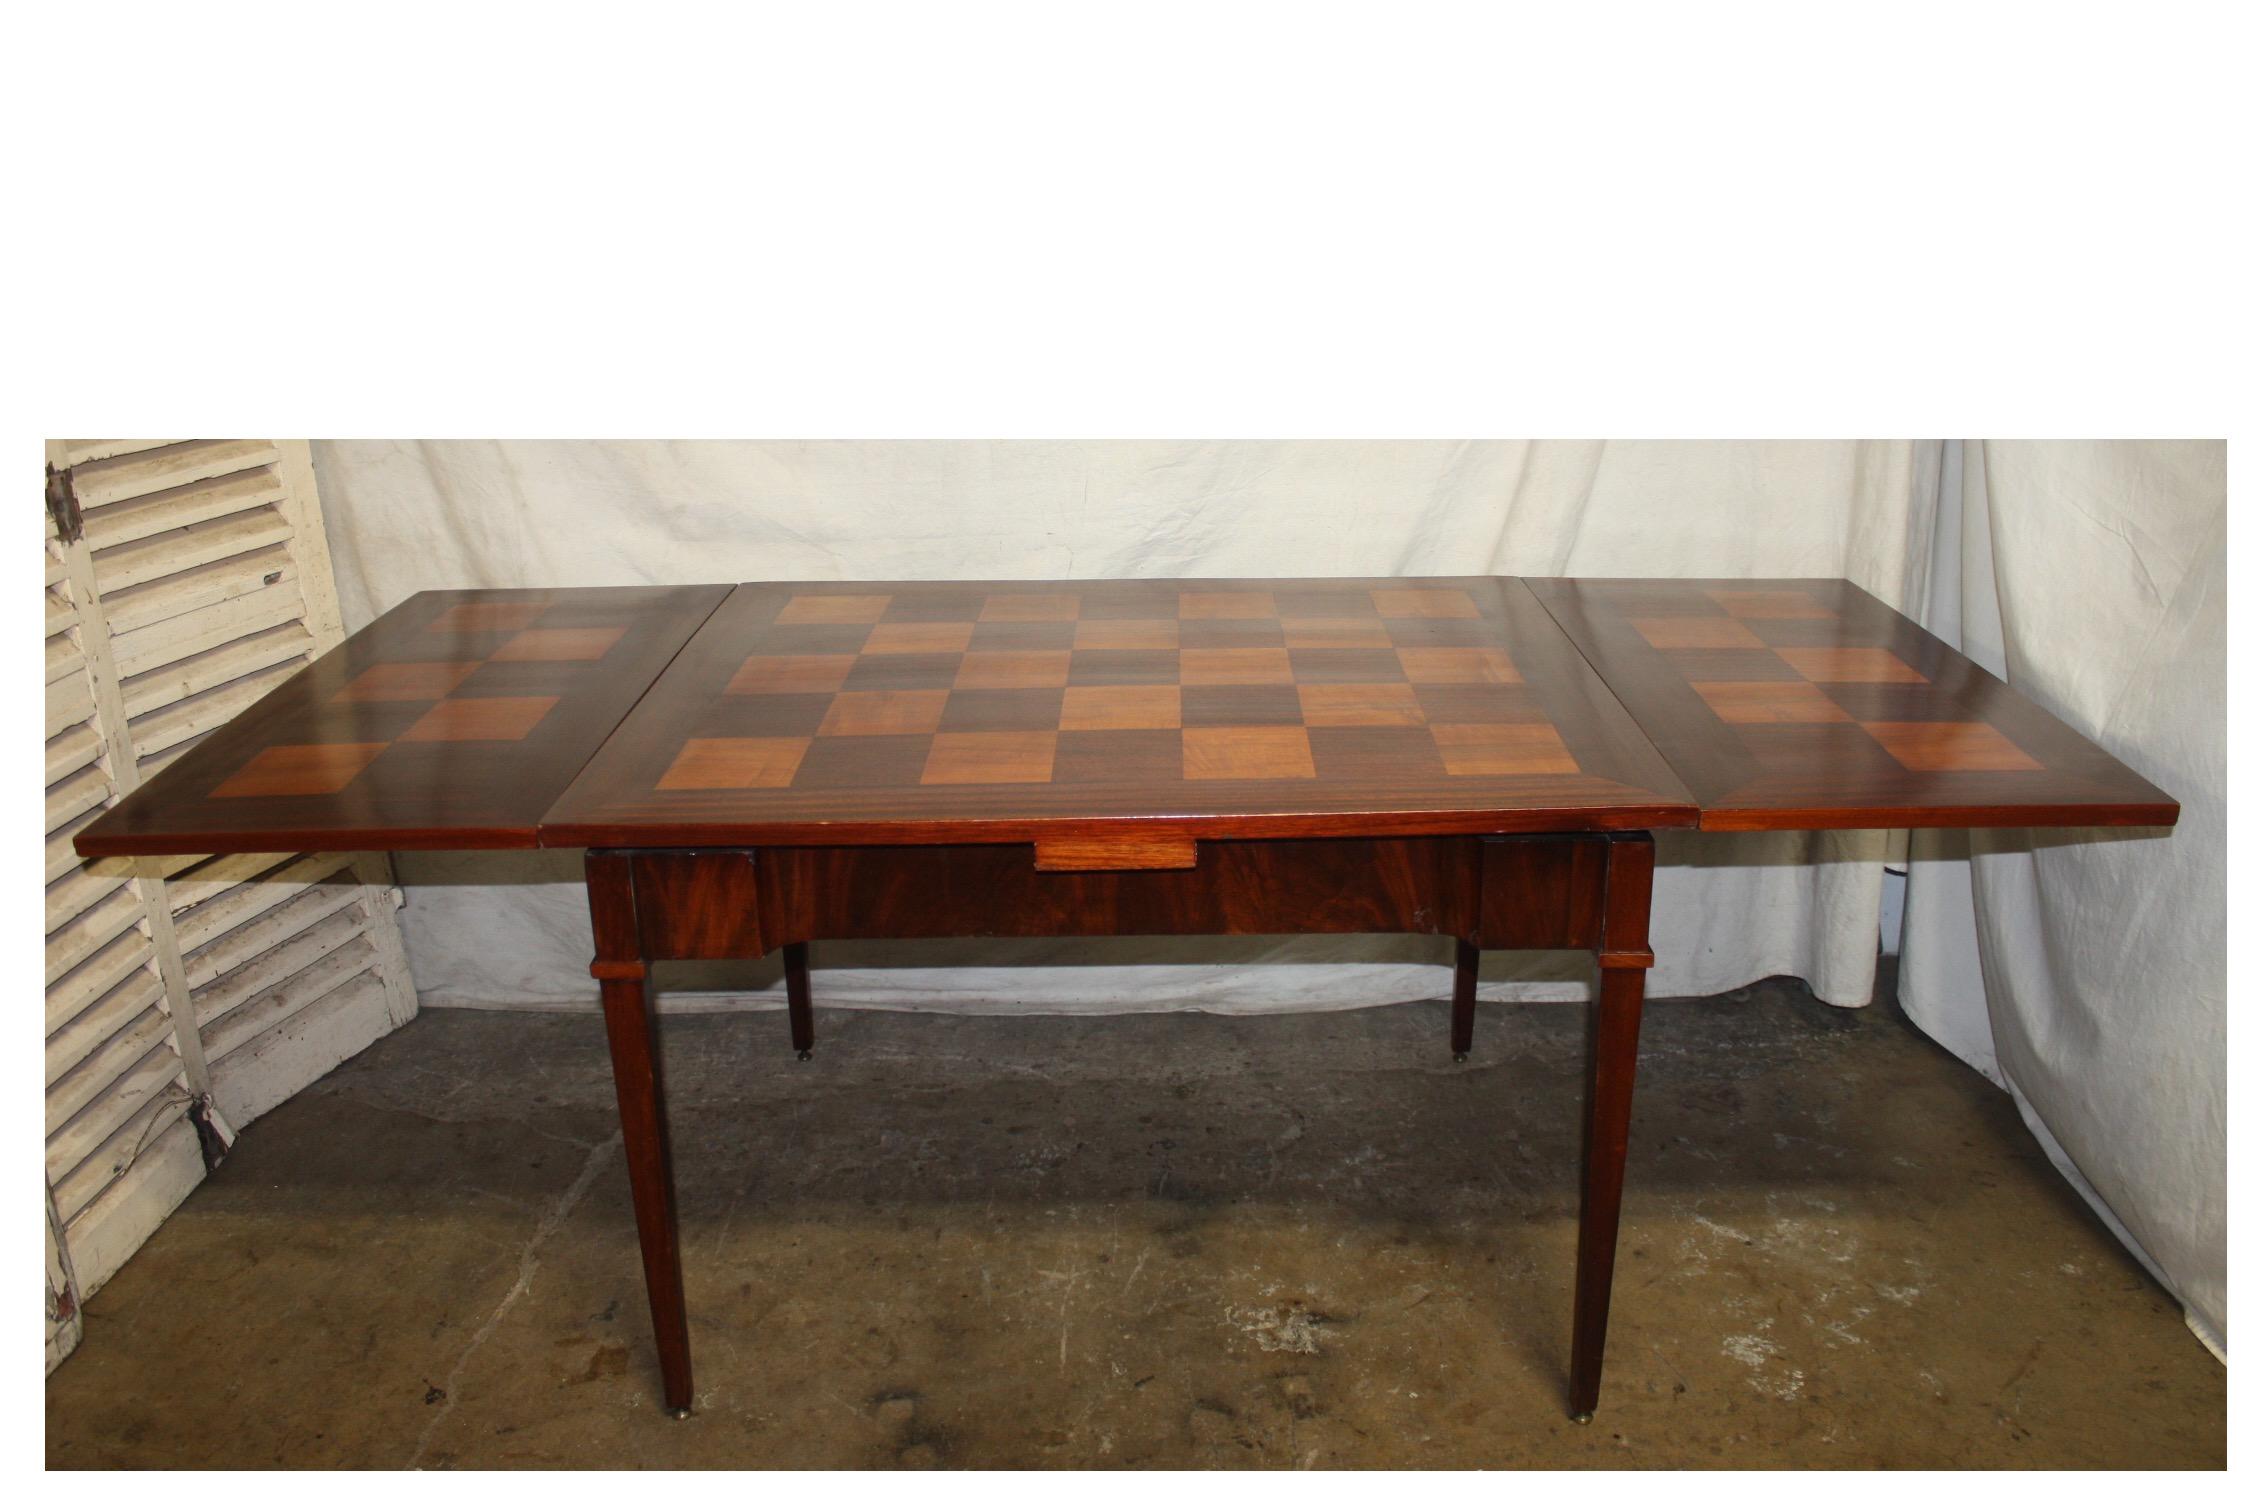 French mid-20th century game table or dining table.
Table opened 79.5in. W x 37in. D x 28.75in. H
Table closed 42.75in. W x 37in. D x 28.75in. H.
 